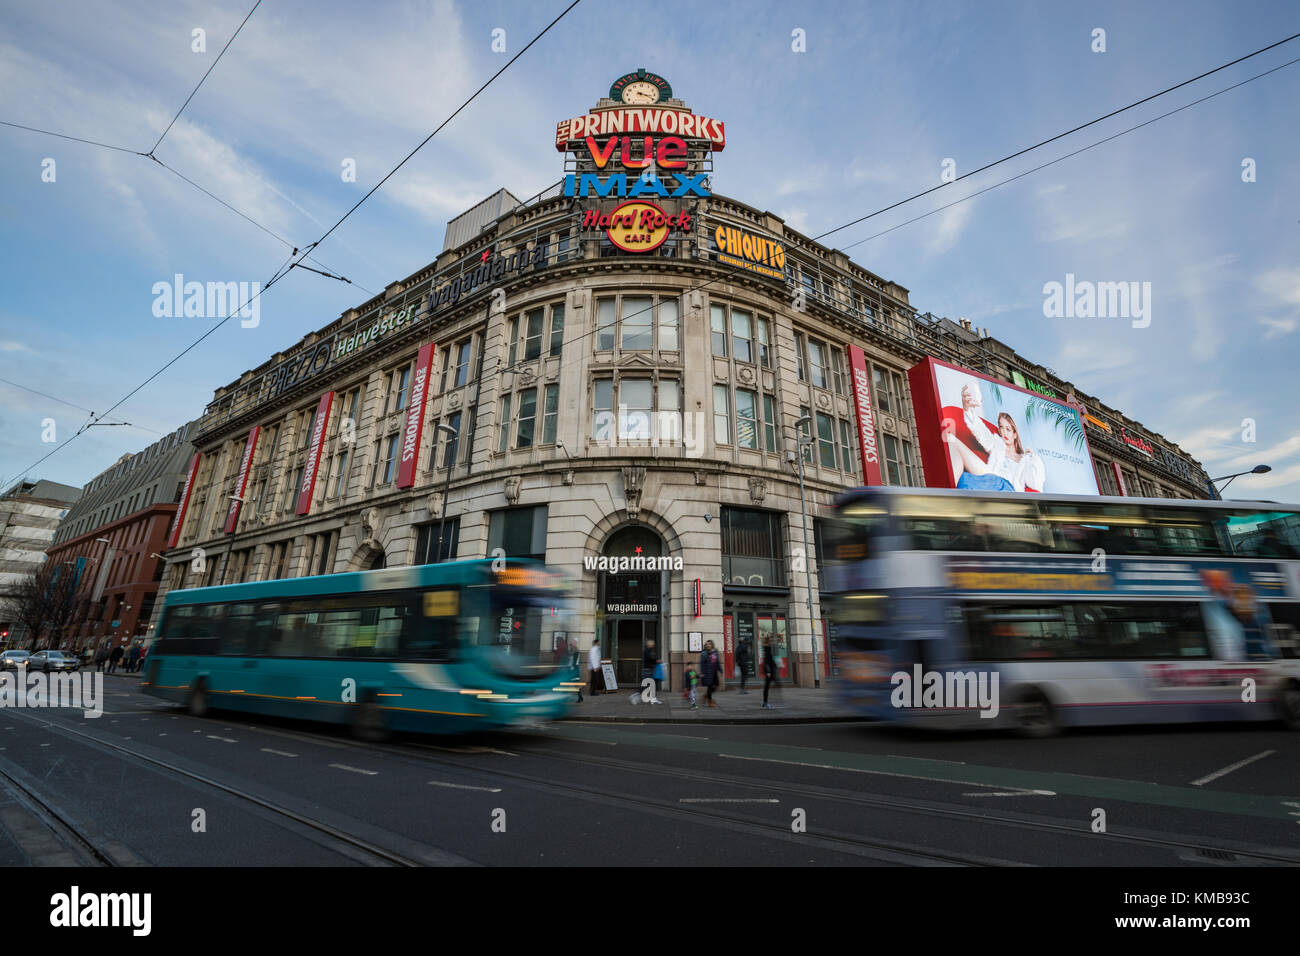 Printworks Entertainment Venue, Corporation Street, Withy Grove, Manchester, England UK Stock Photo